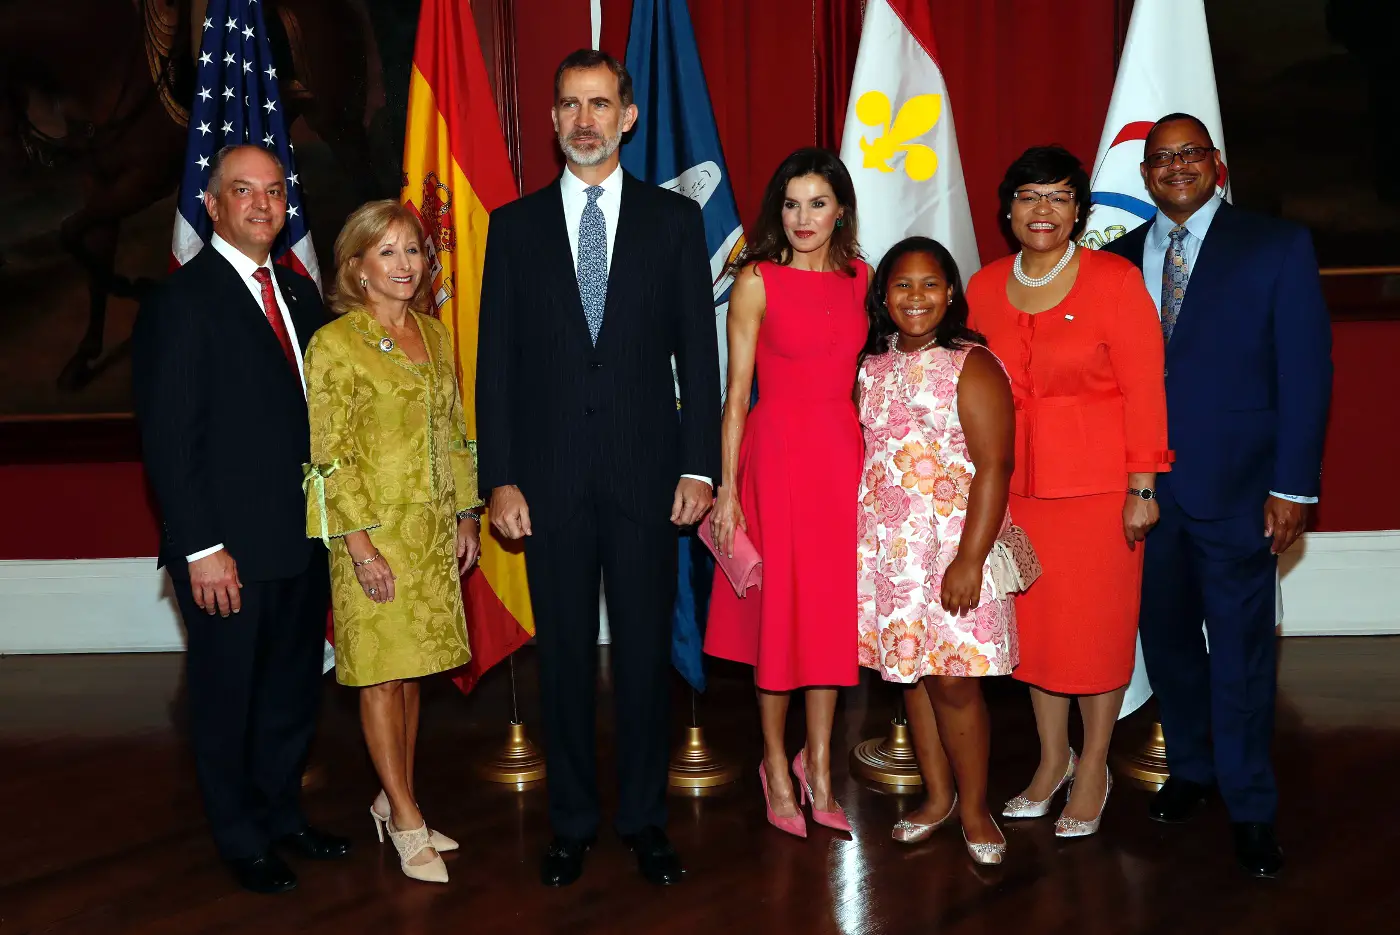 State Visit US- King Felipe and Queen Letizia got city keys in New Orleans